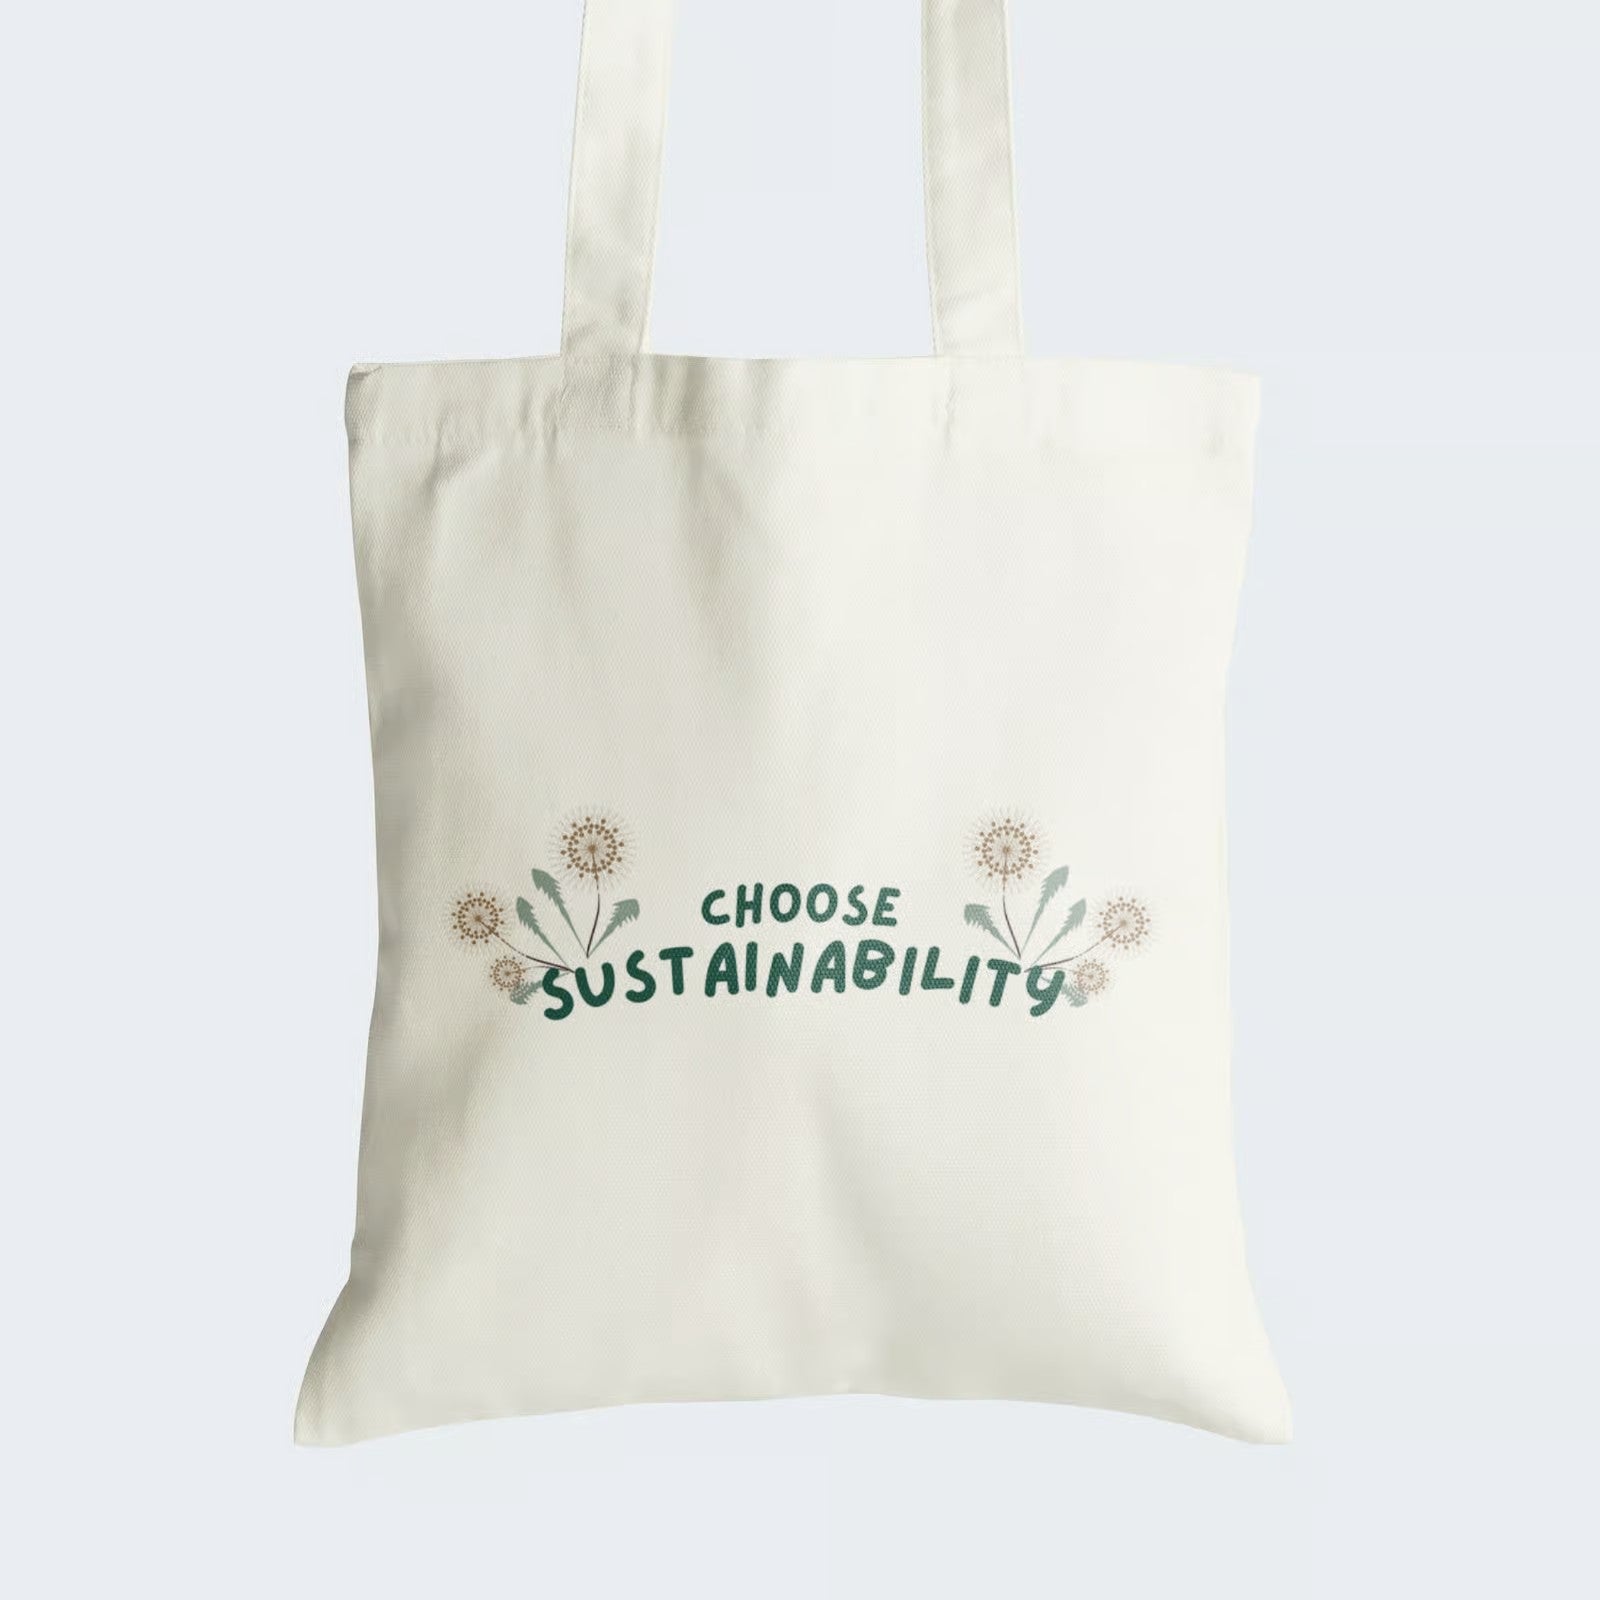 Elevate your style and commitment to sustainability with our Cotton Canvas Tote Bag. Featuring vibrant green graphic text "Choose Sustainability" adorned with dandelion flowers, this tote blends fashion and eco-consciousness seamlessly. Crafted for durability and style, it includes a secure zipper closure for daily convenience. Carry your values with our "Choose Sustainability" Cotton Canvas Tote Bag - order now!